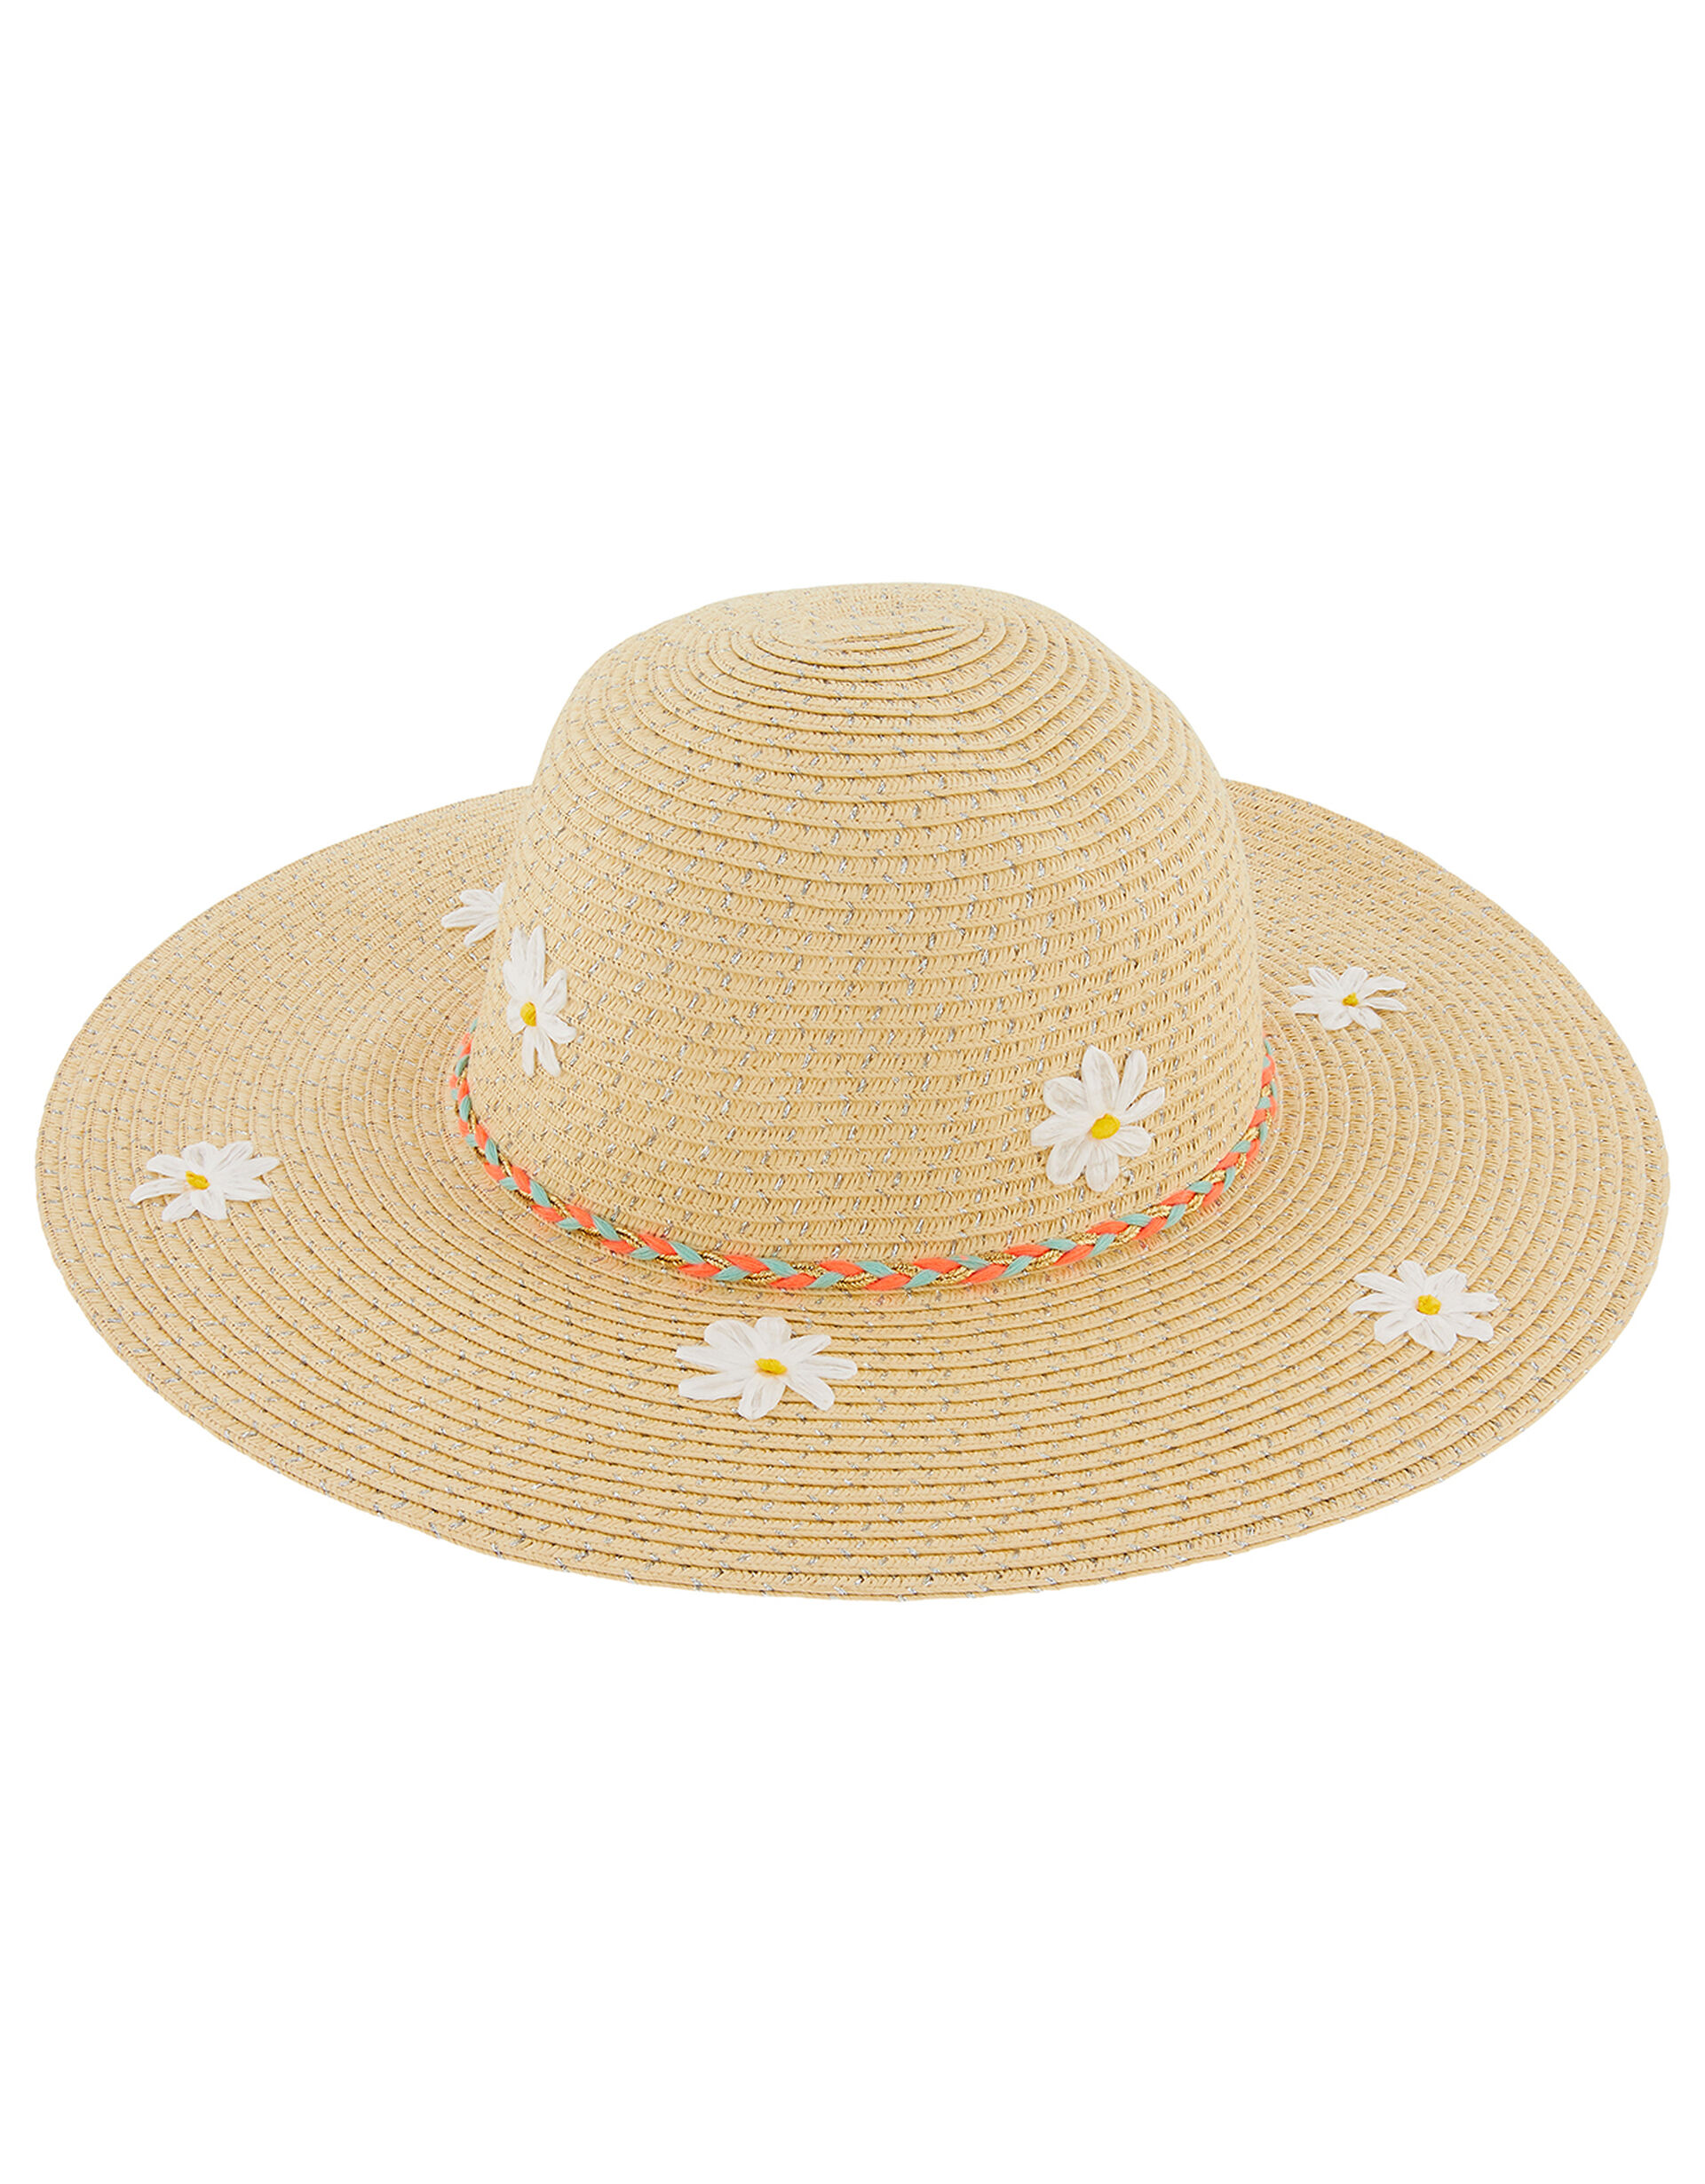 Daisy Sparkle Floppy Hat, Natural (NATURAL), large